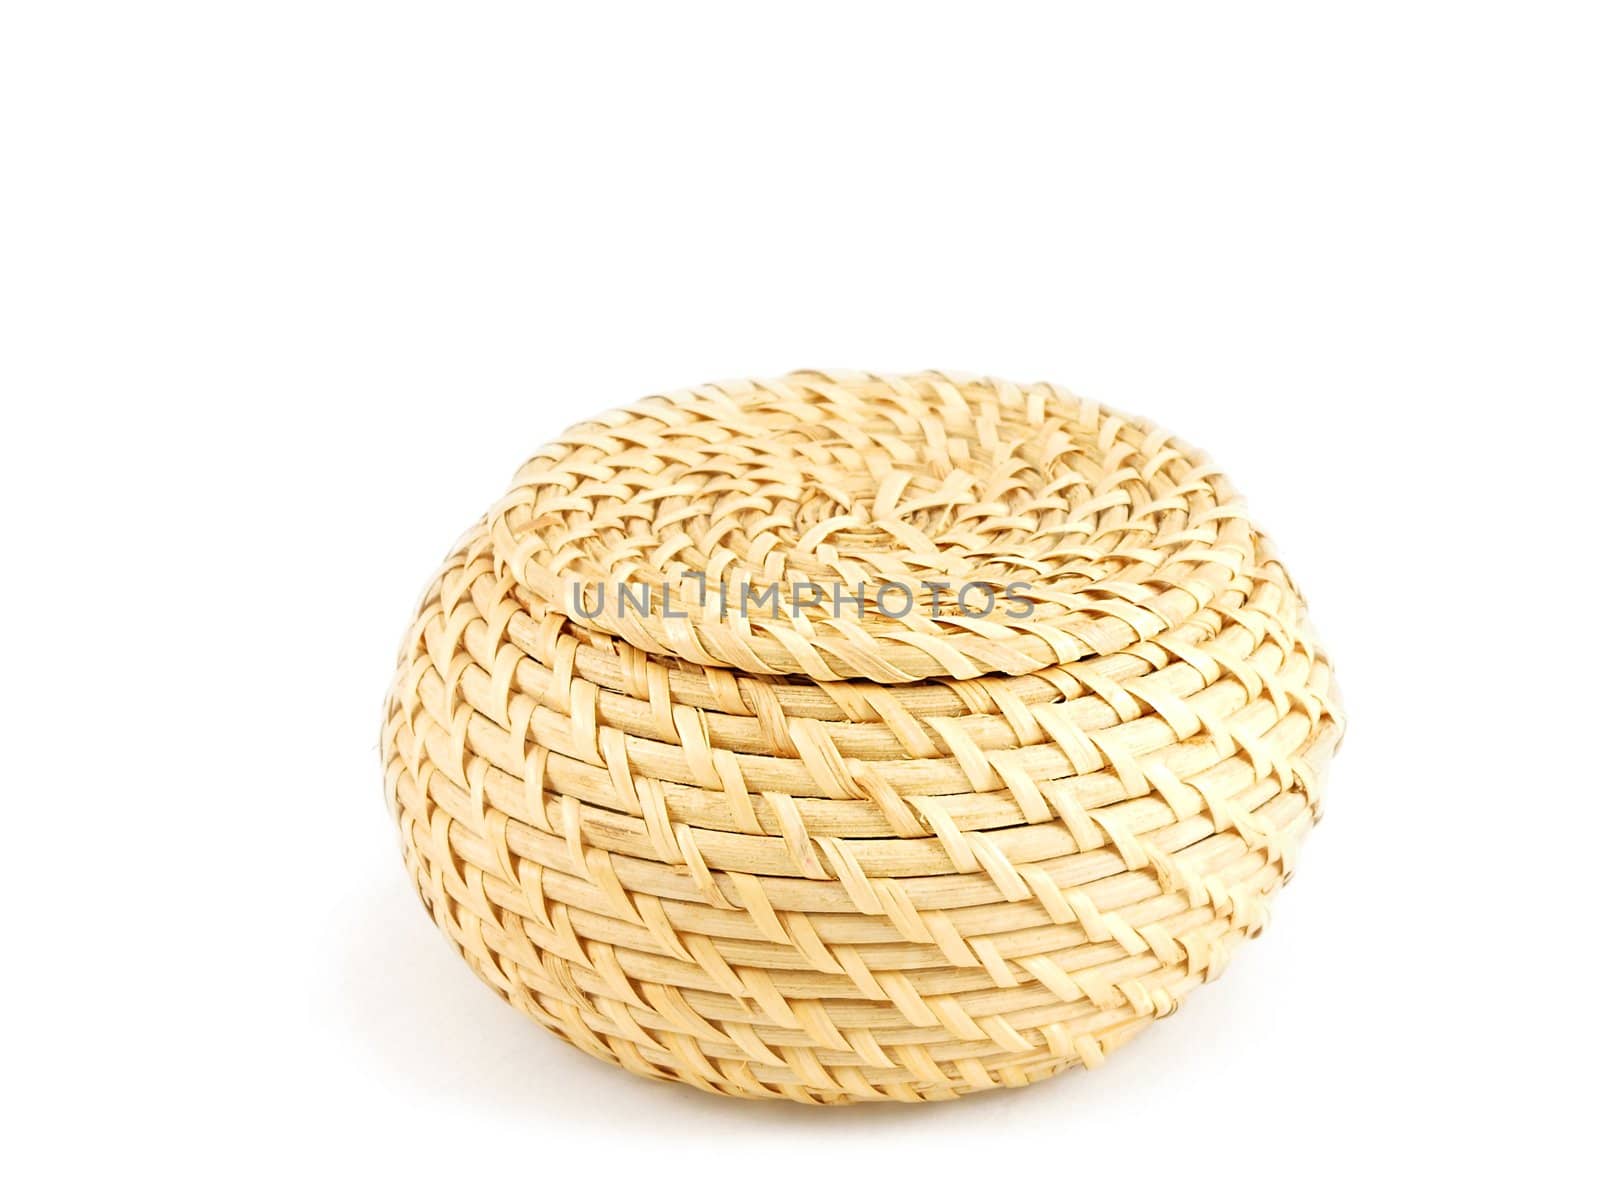 Wooden basket closed with matching top, towards white background